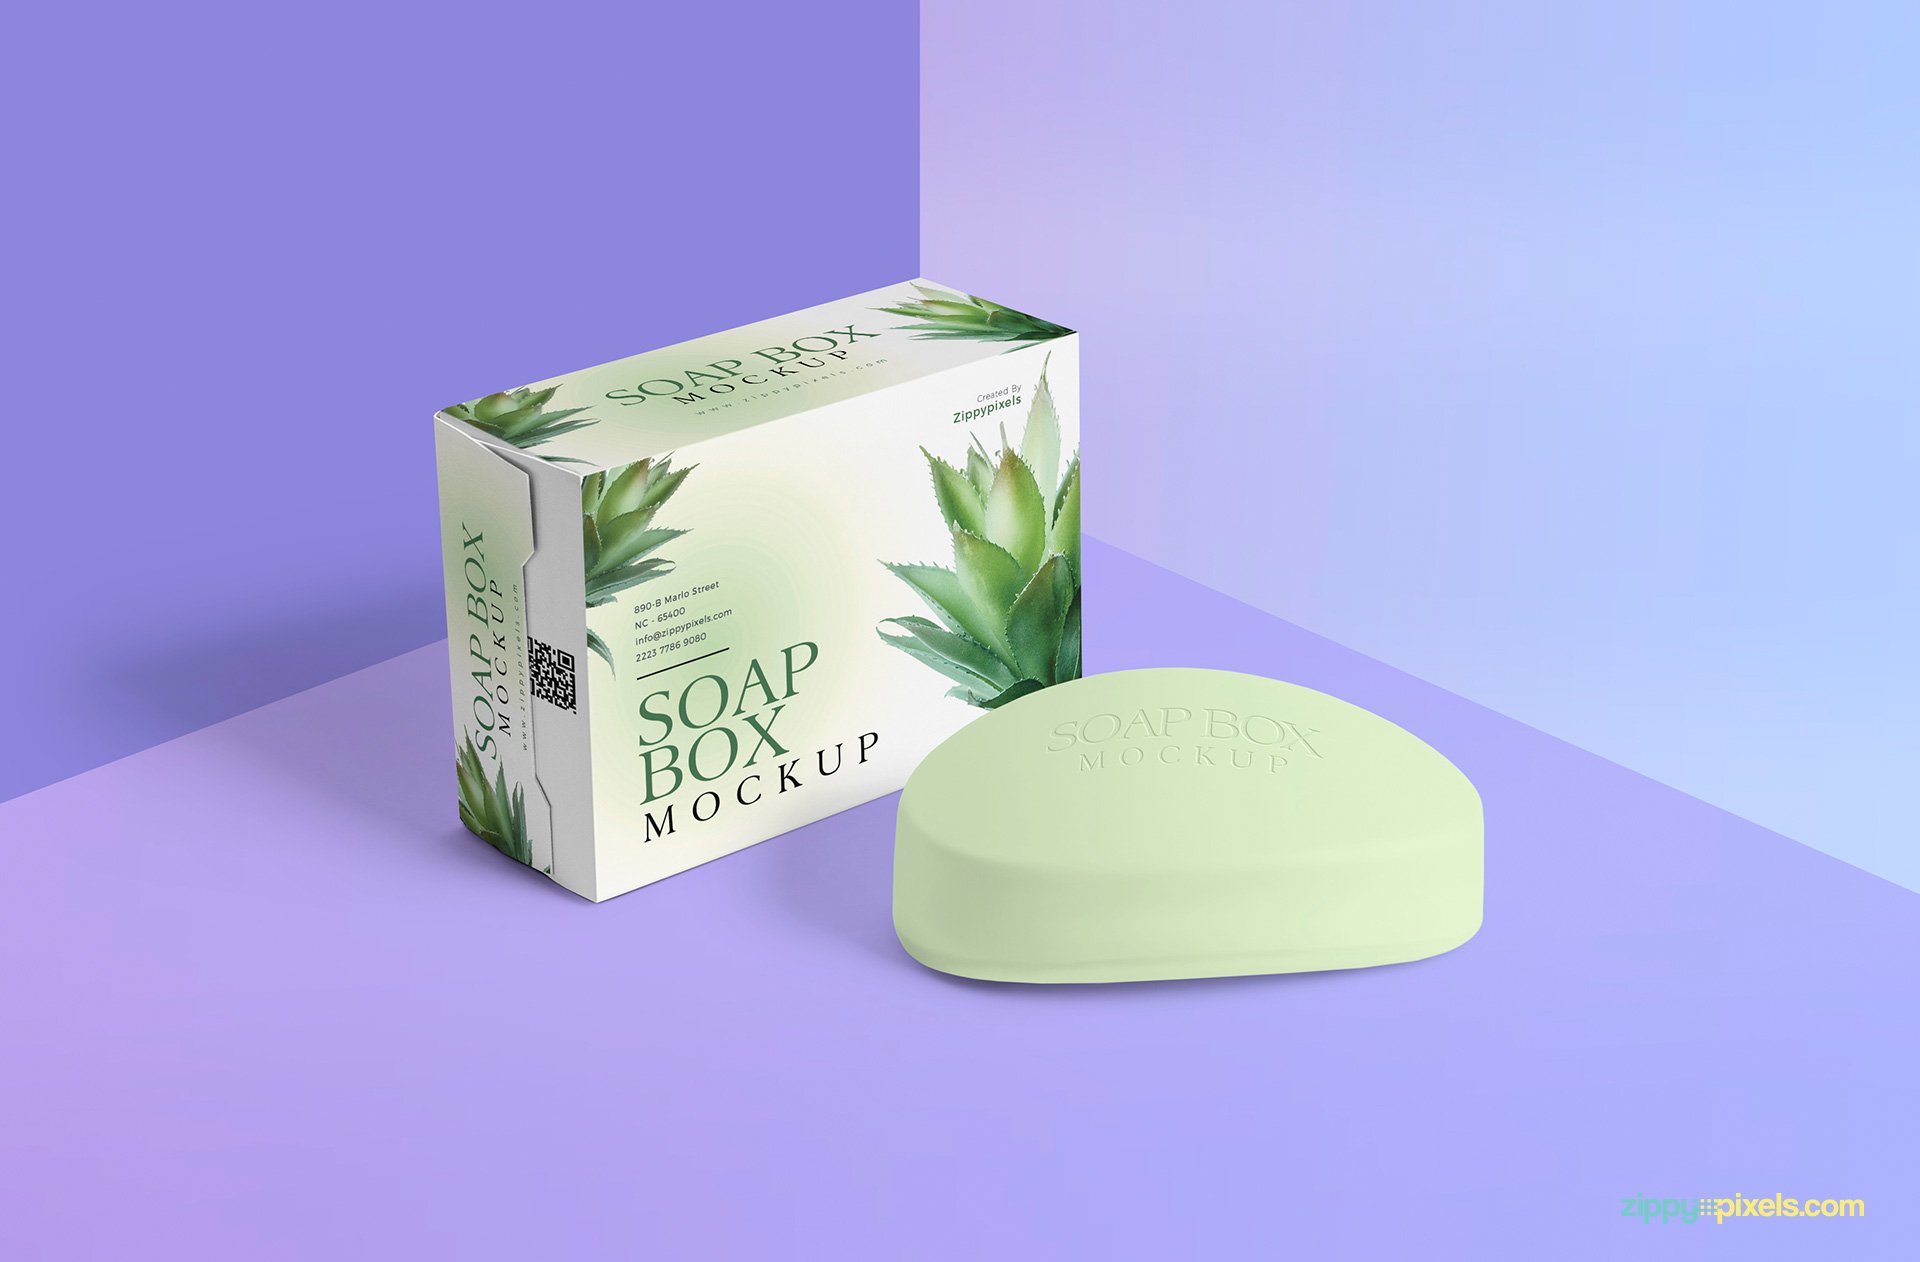 Download Free 35 Ultra Realistic Soap And Packaging Mockup Templates Decolore Net PSD Mockups.